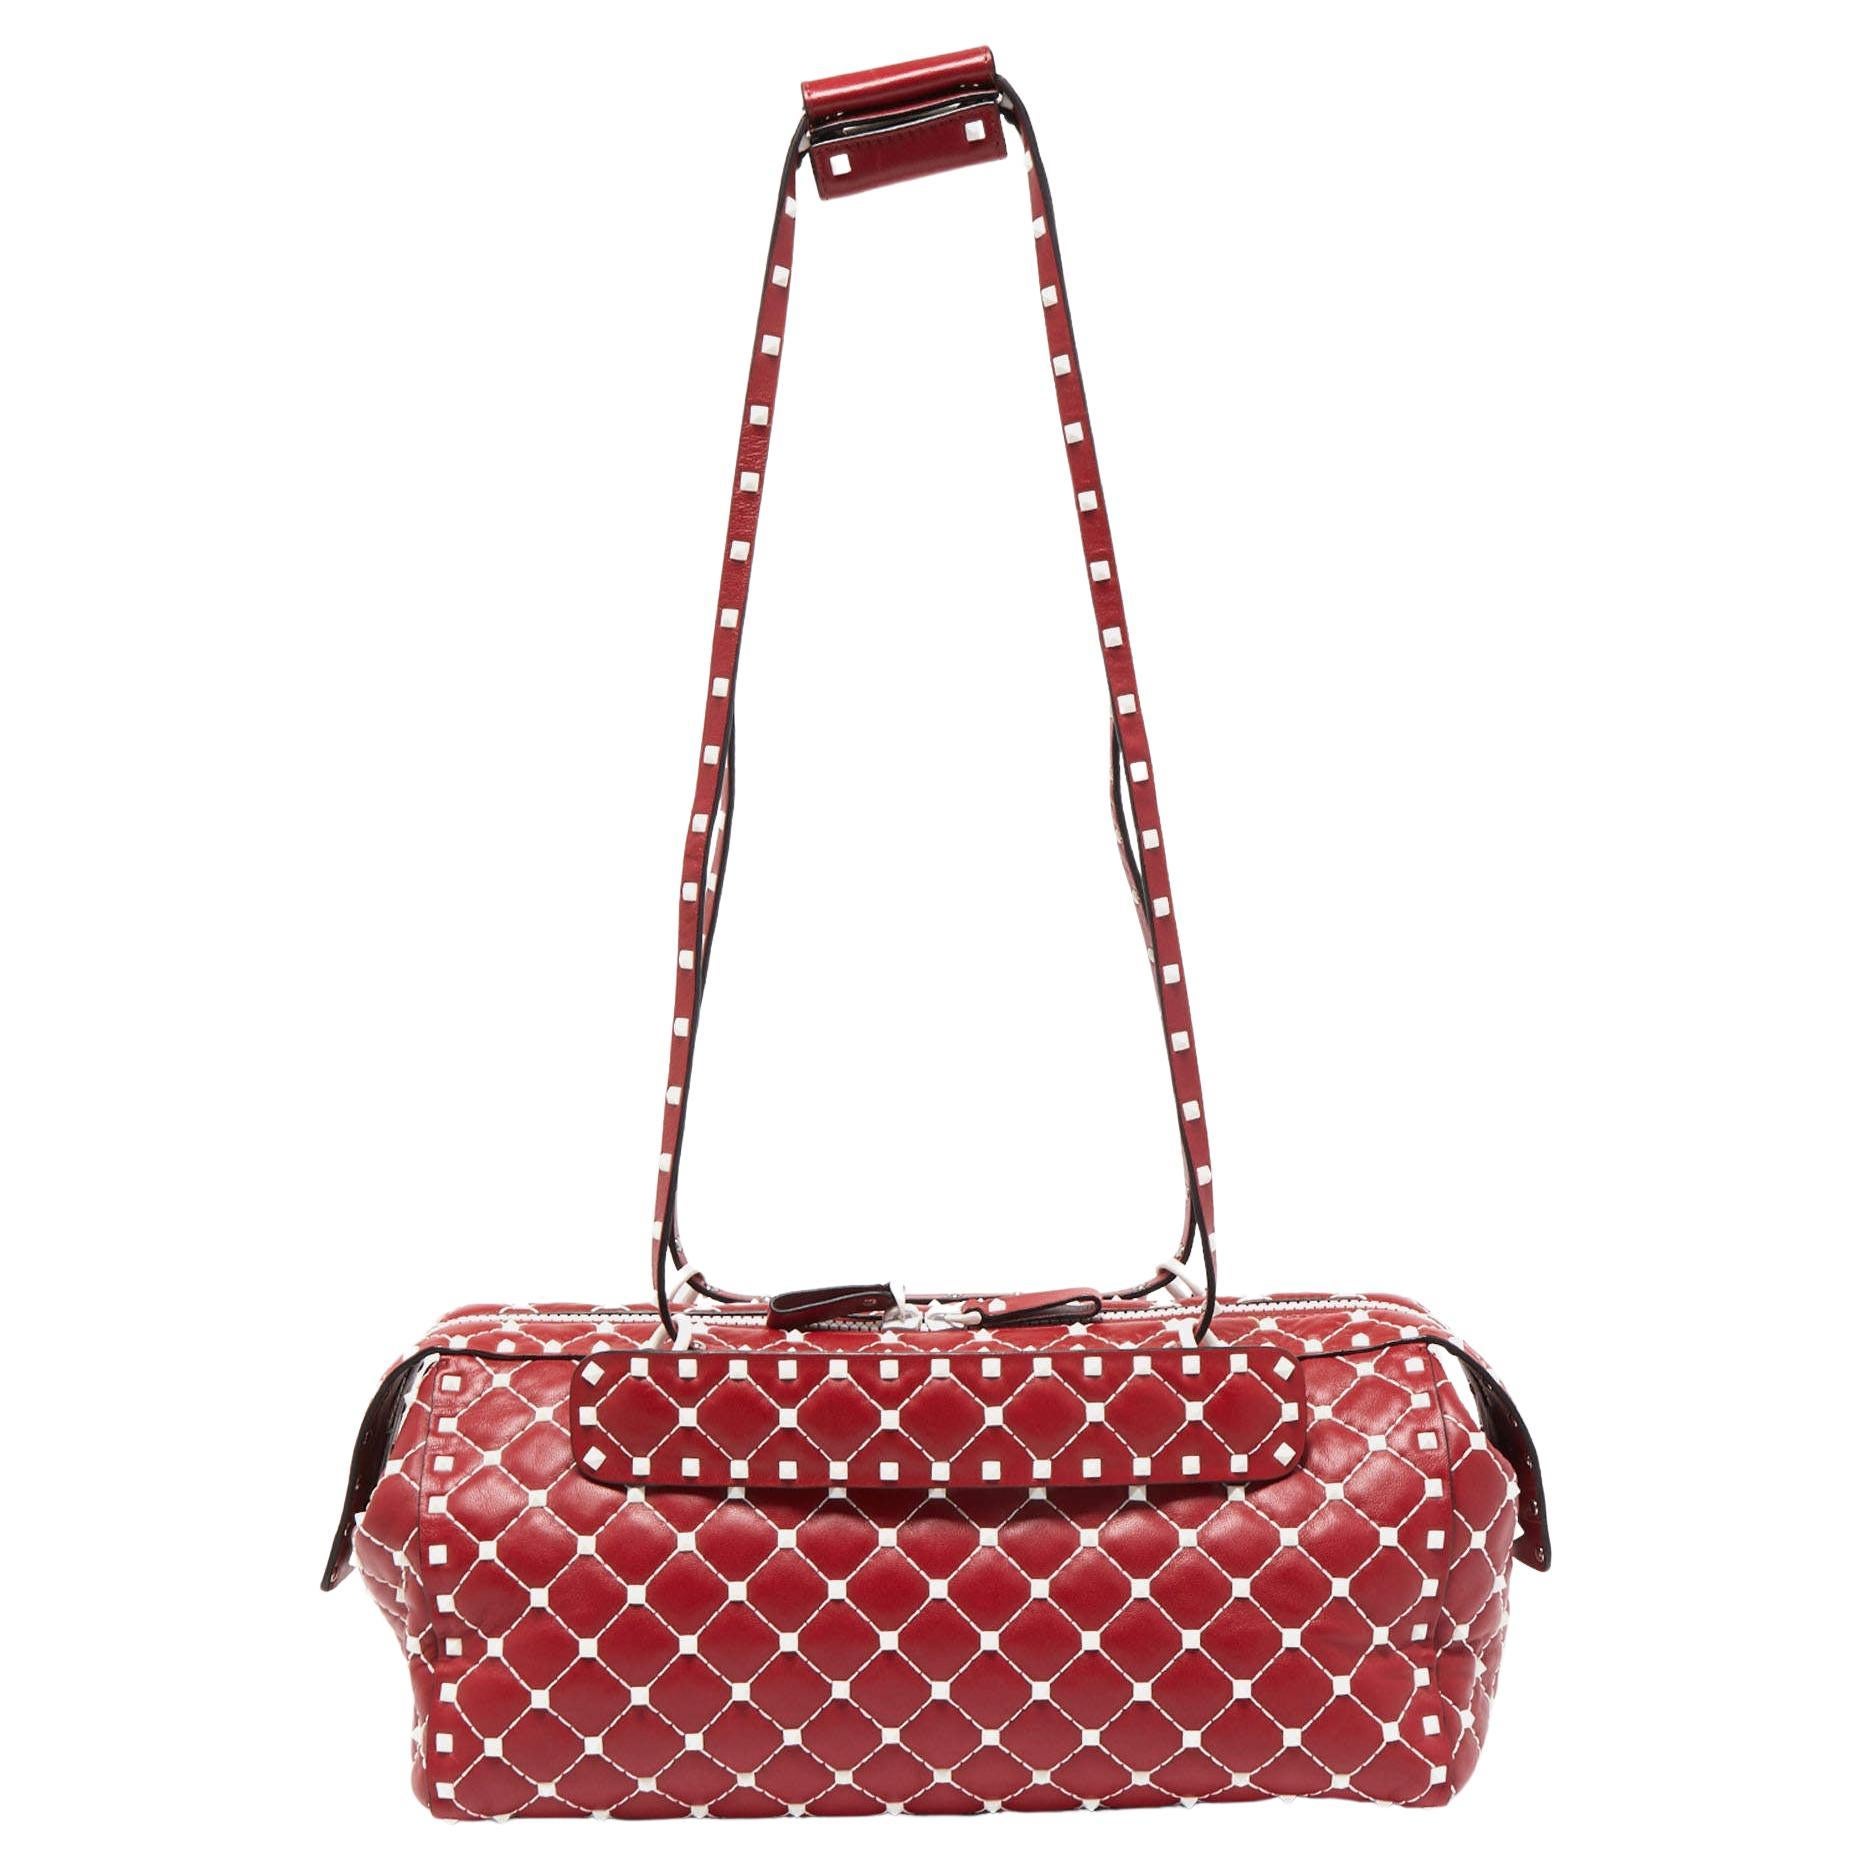 Valentino Red Leather Rockstud Spike Duffel Bag For Sale